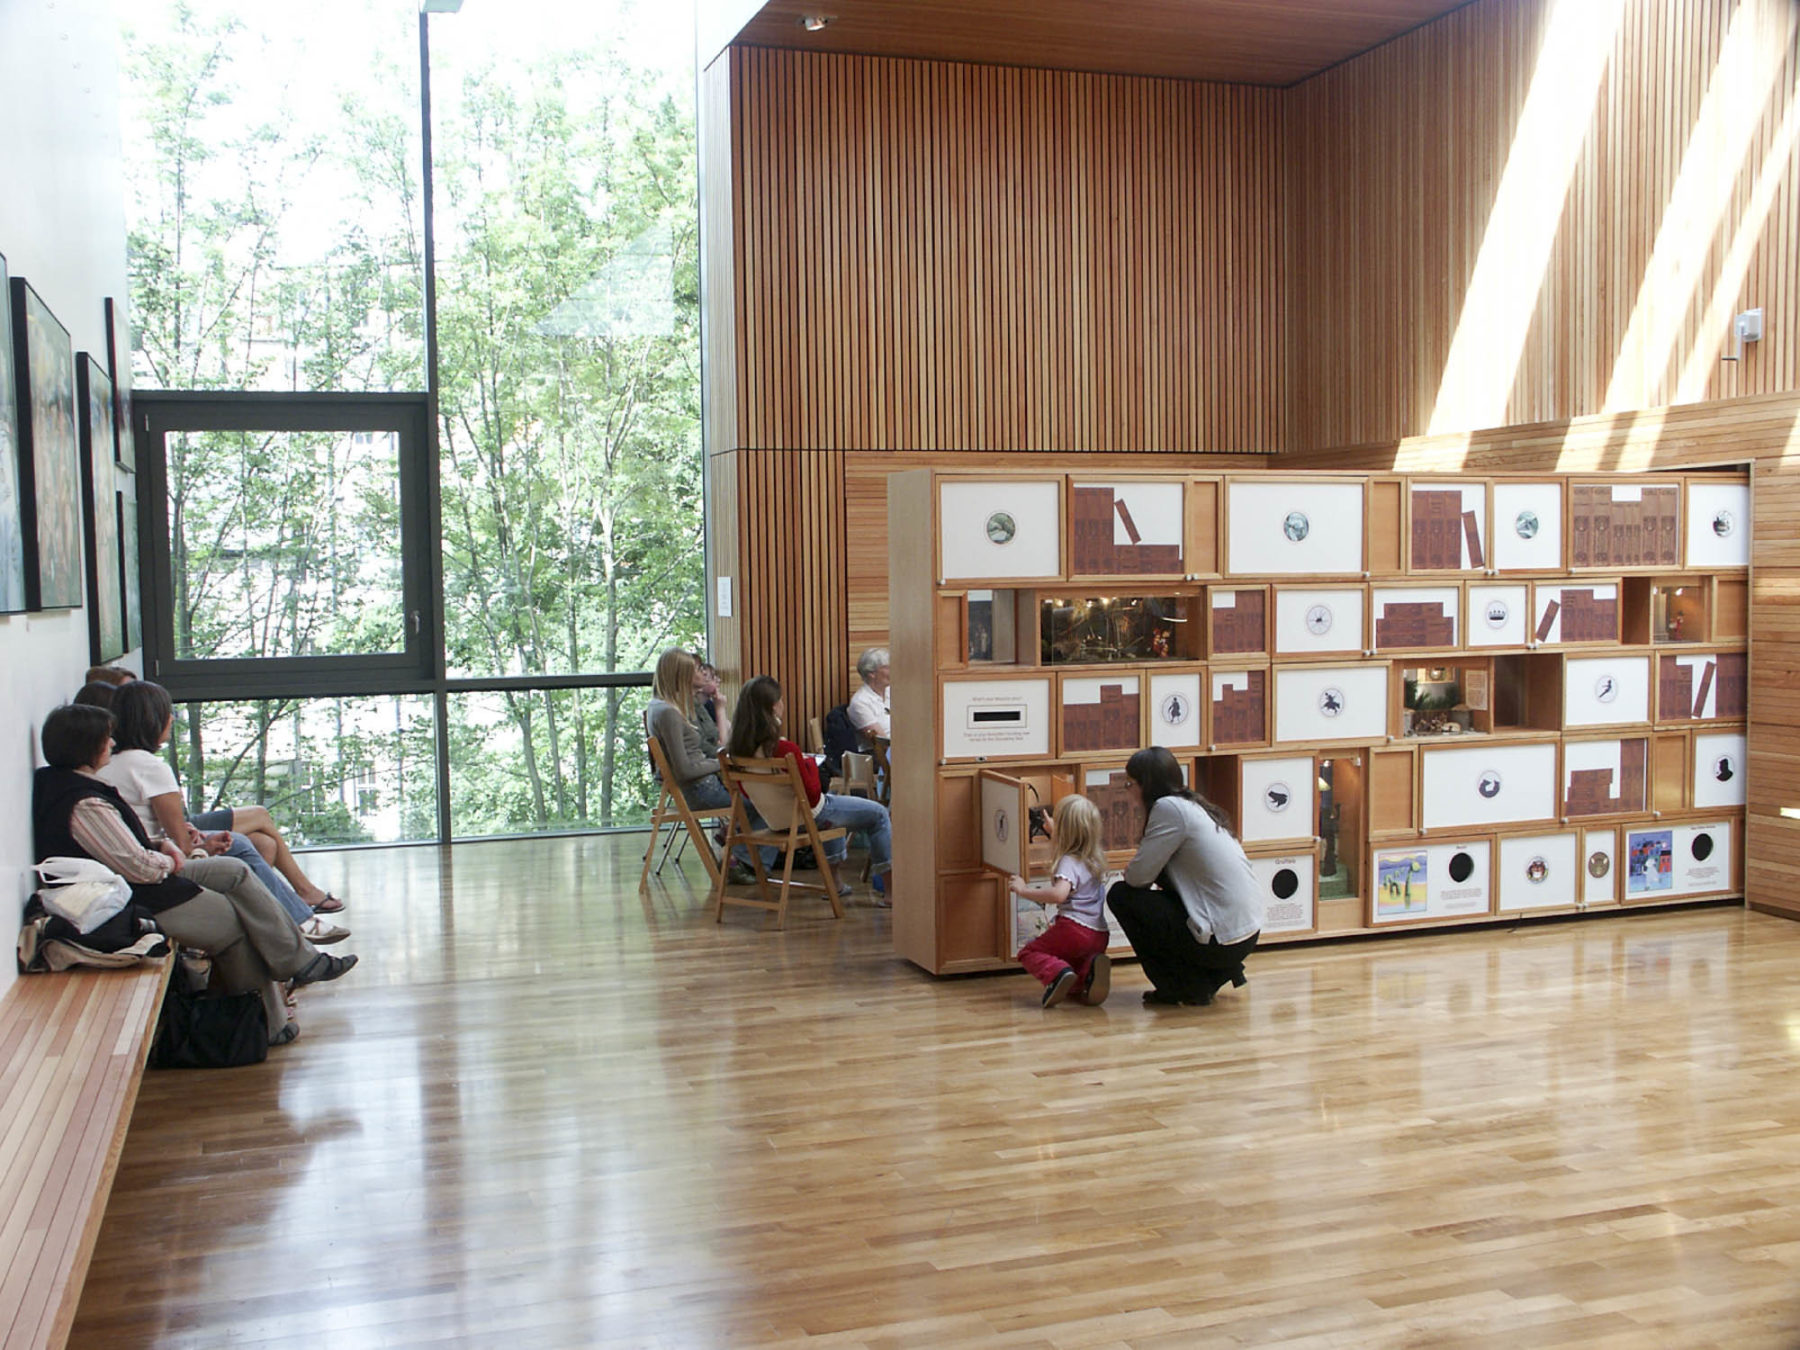 Interior of the Scottish Storytelling Centre looking through the ground floor space to the garden. Pull out shelving creates a divider for the space